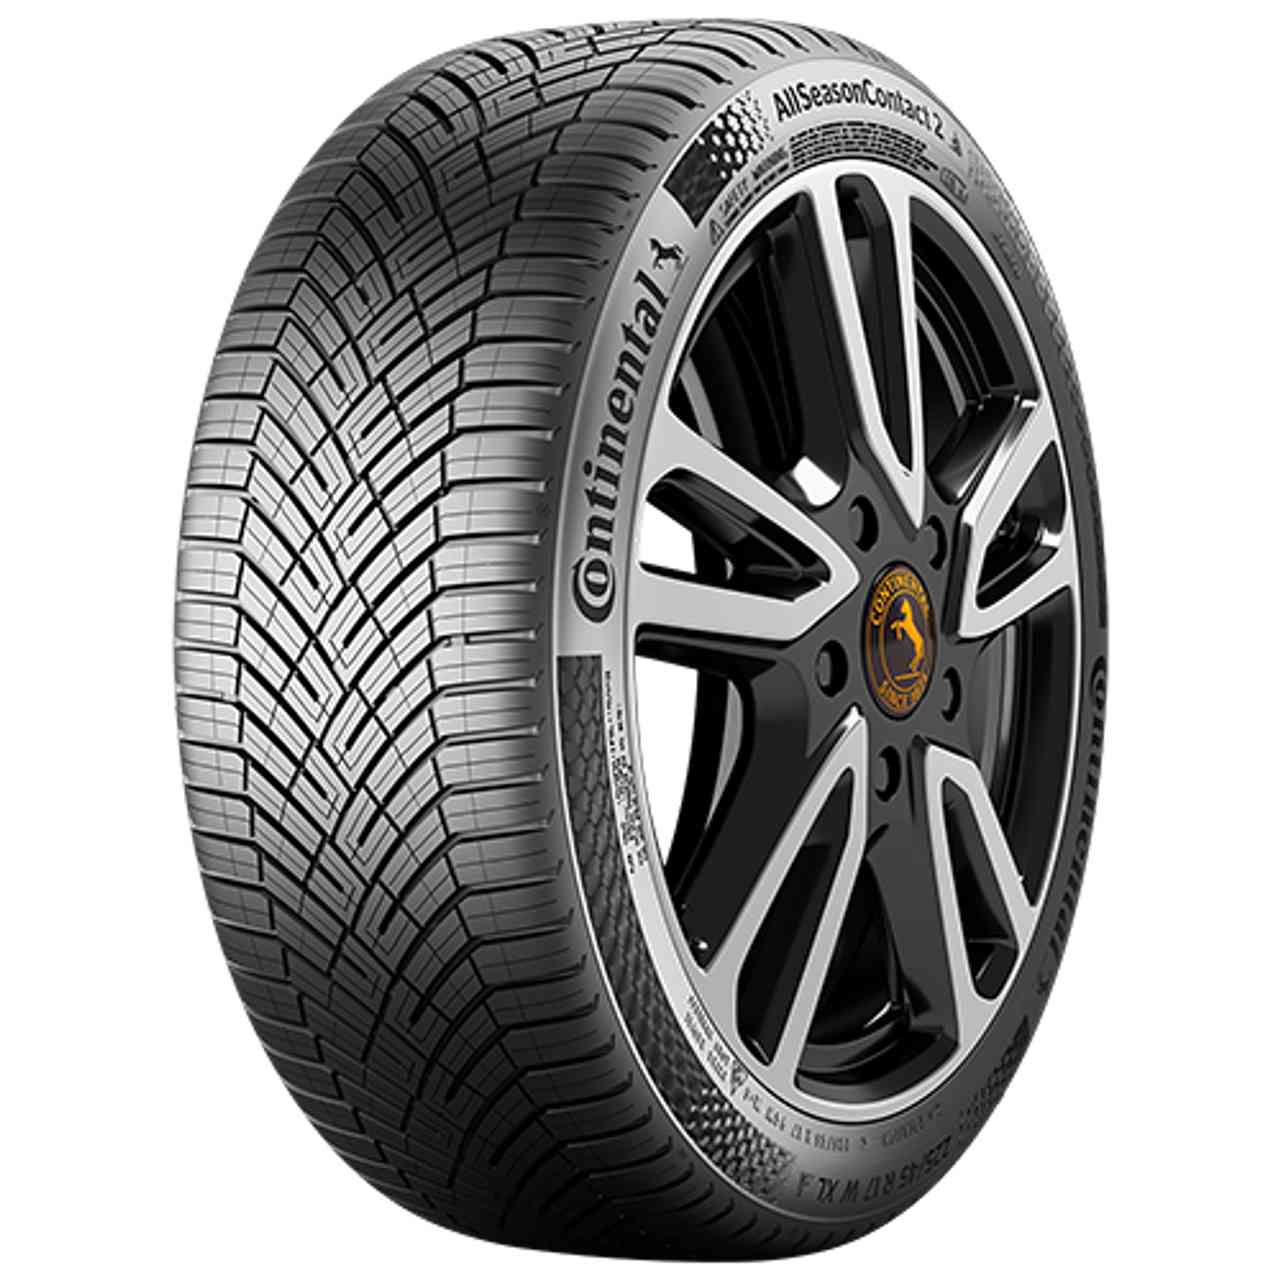 CONTINENTAL ALLSEASONCONTACT 2 (EVc) 225/55R18 102V BSW XL